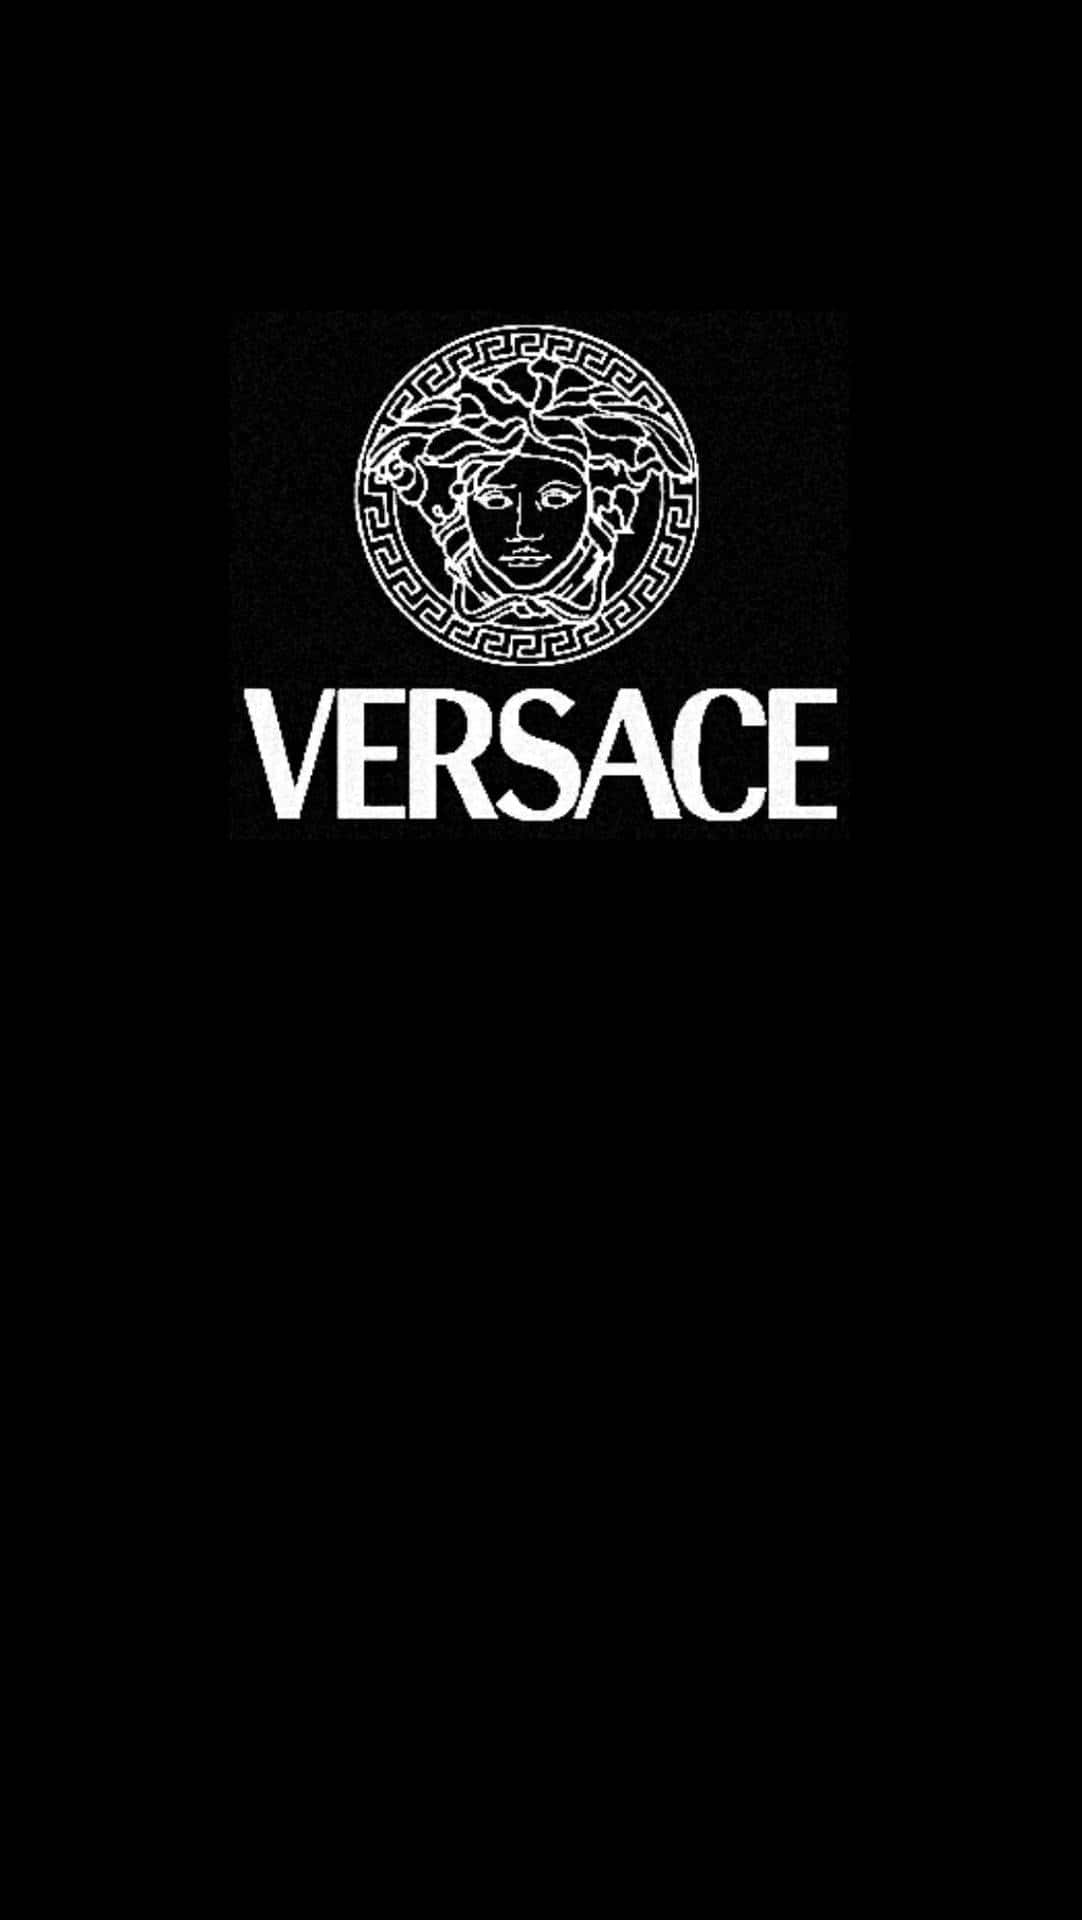 "Make a statement with Versace"